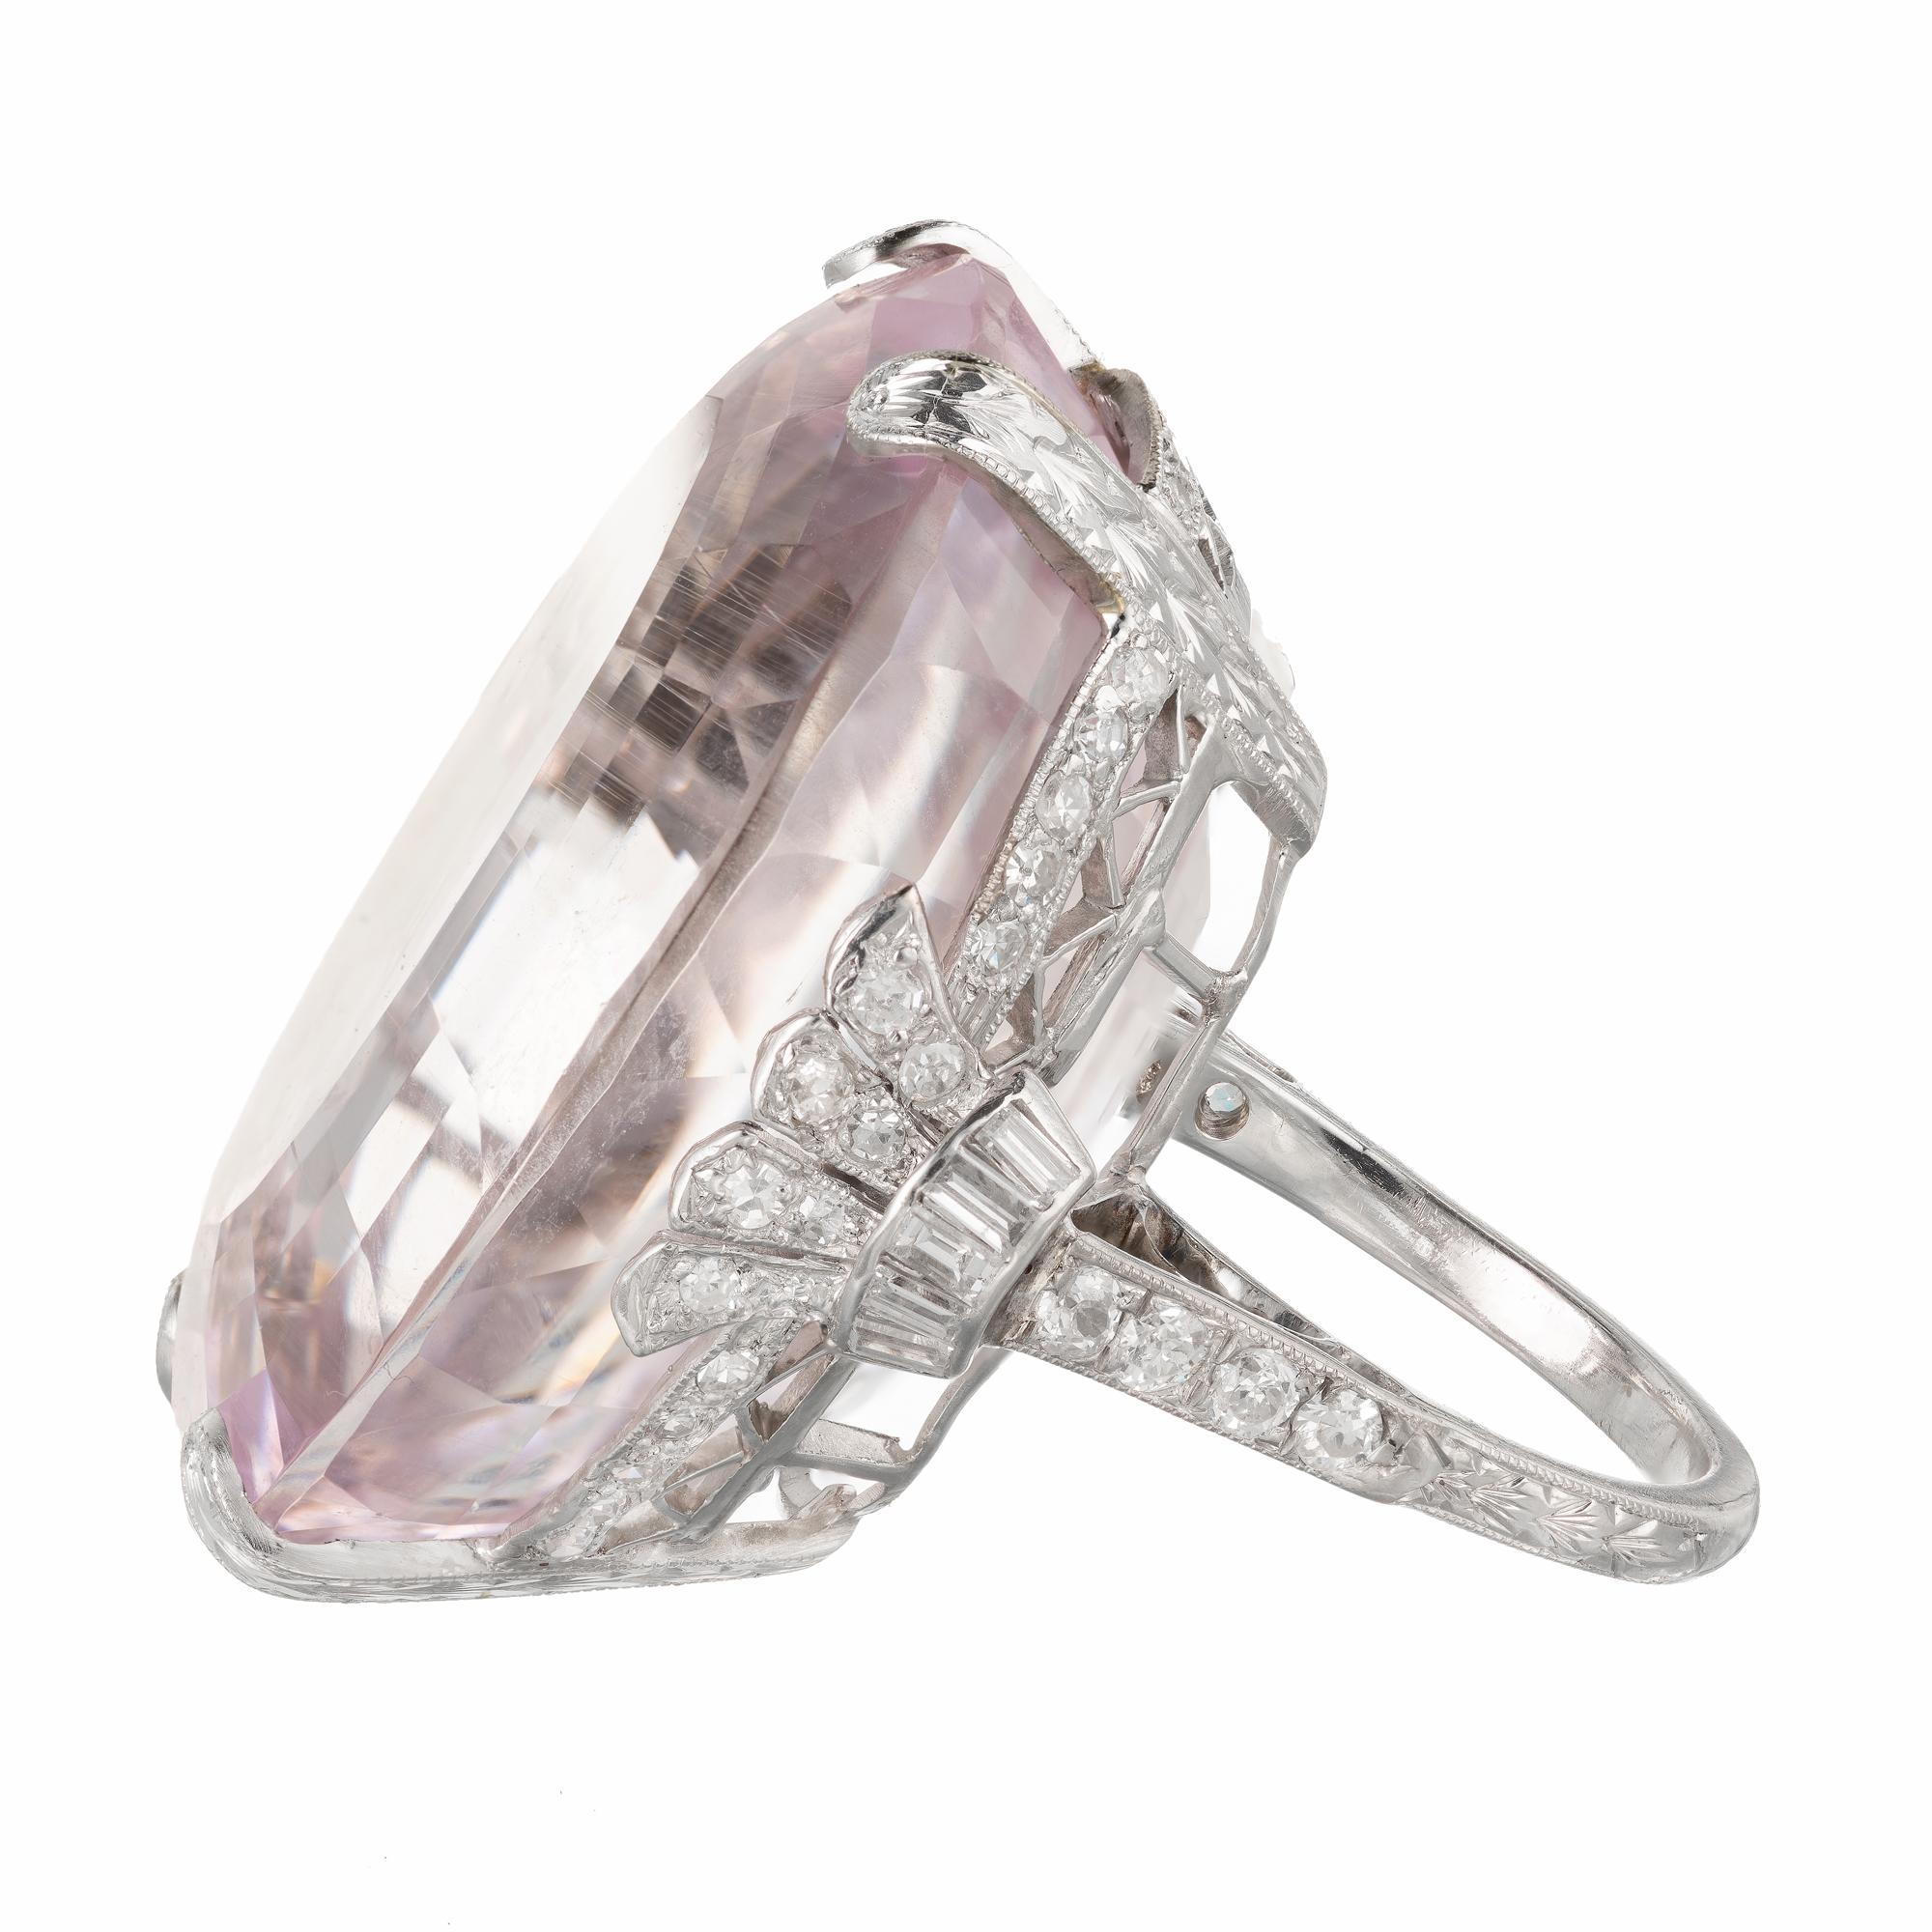 GIA certified bright pink Kunzite 80.25ct Platinum Art Deco ring circa 1915-1920. Handmade and hand engraved. Beautiful workmanship. GIA report determines the stone to be Kunzite. 

1 oval bright pink Kunzite, approx. total weight 80.25cts, GIA